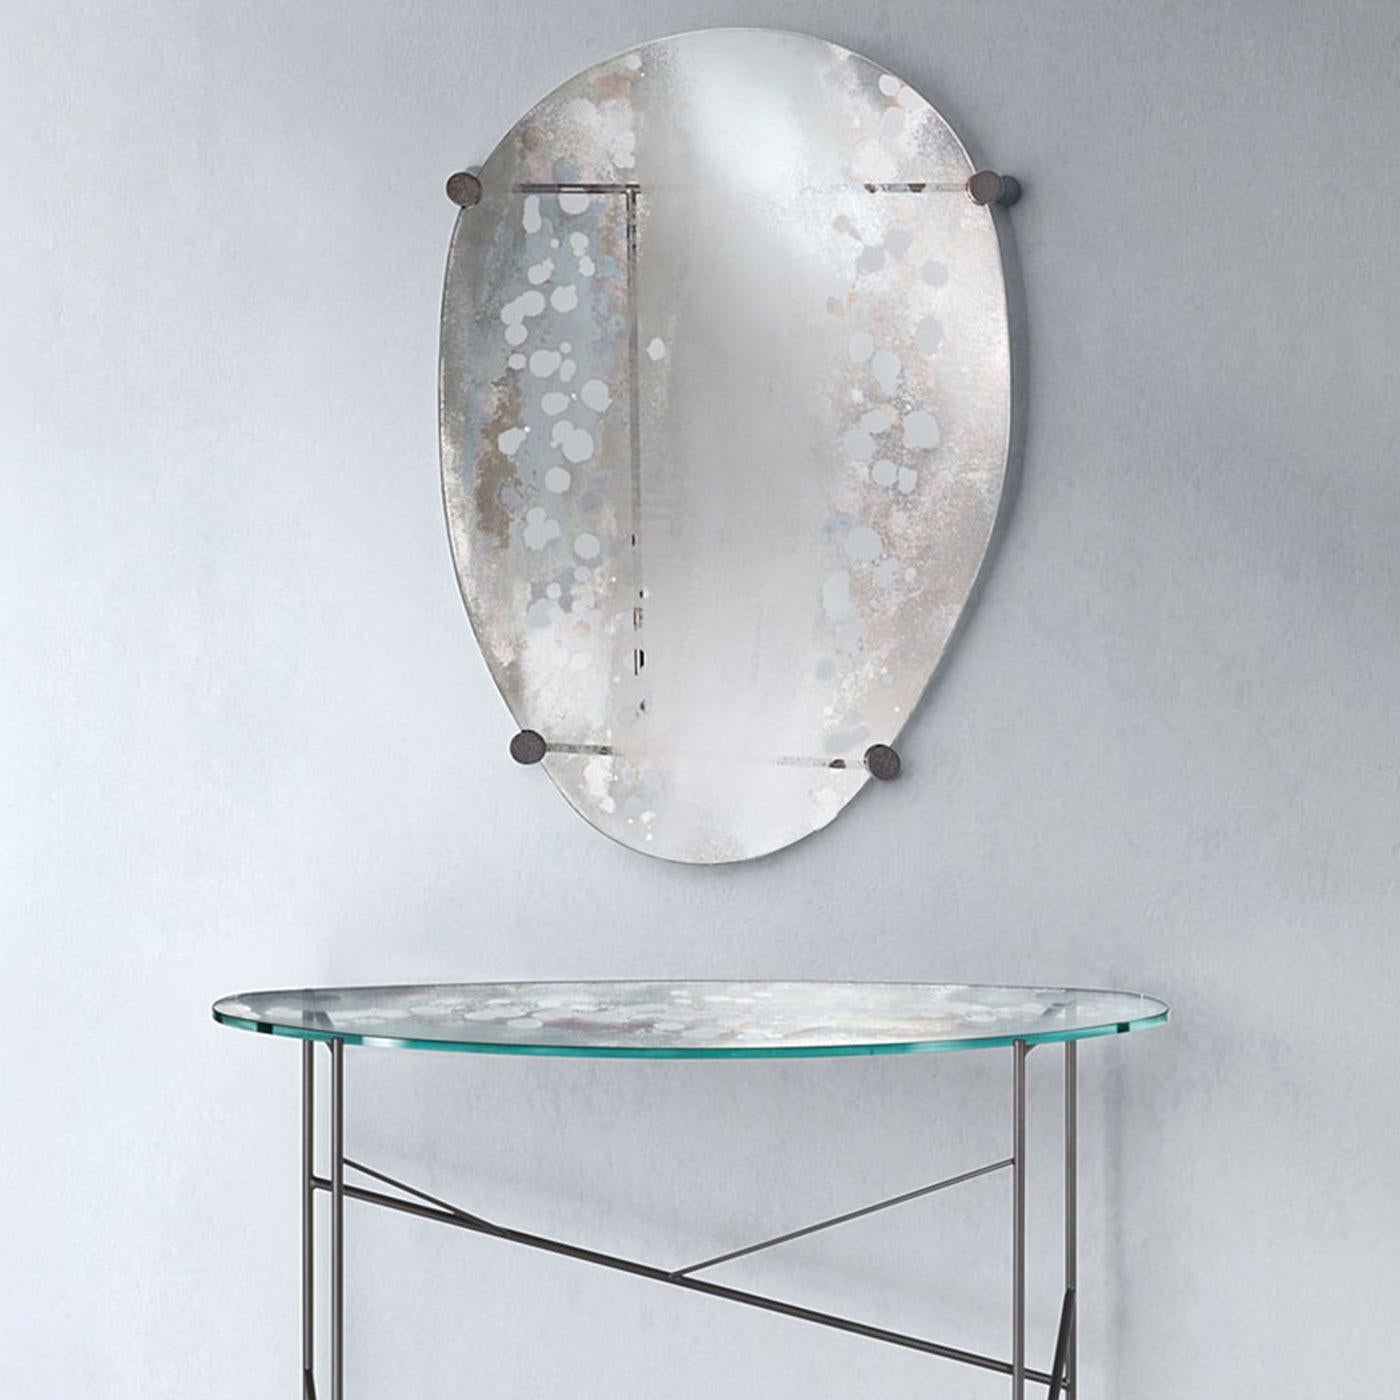 Contemporary style mirror from the K. Collection, inspired by the astral charts and alchemy, this piece, designed by Giovanni Luca Ferreri, depicts the 